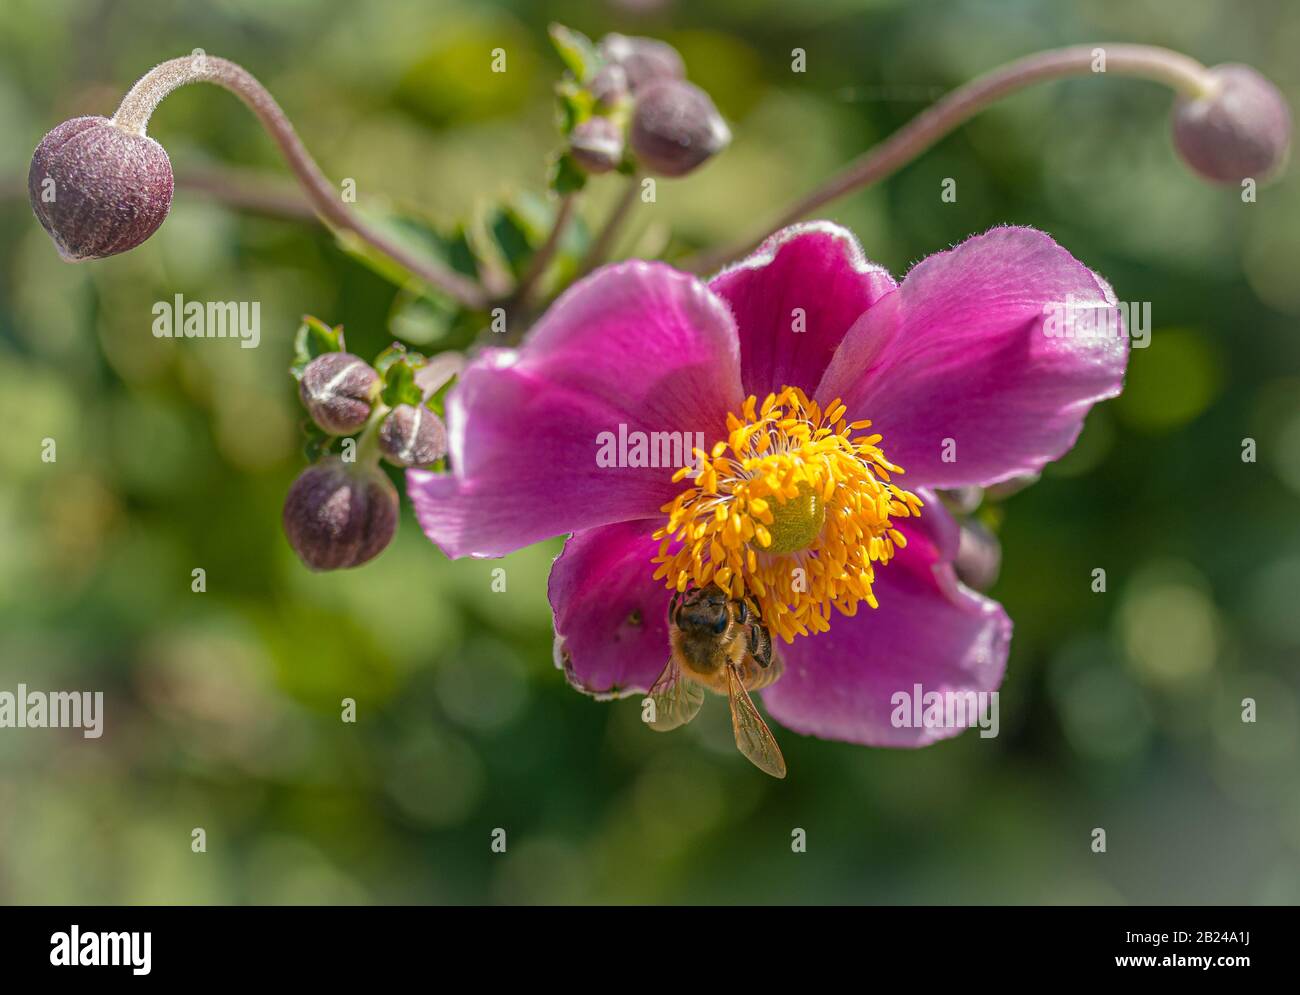 anemone flower purple Anemone hupehensis) plants in flower. Pink garden plant in the family Ranunculaceae. Closeup on Japanese Anemone flowers Stock Photo